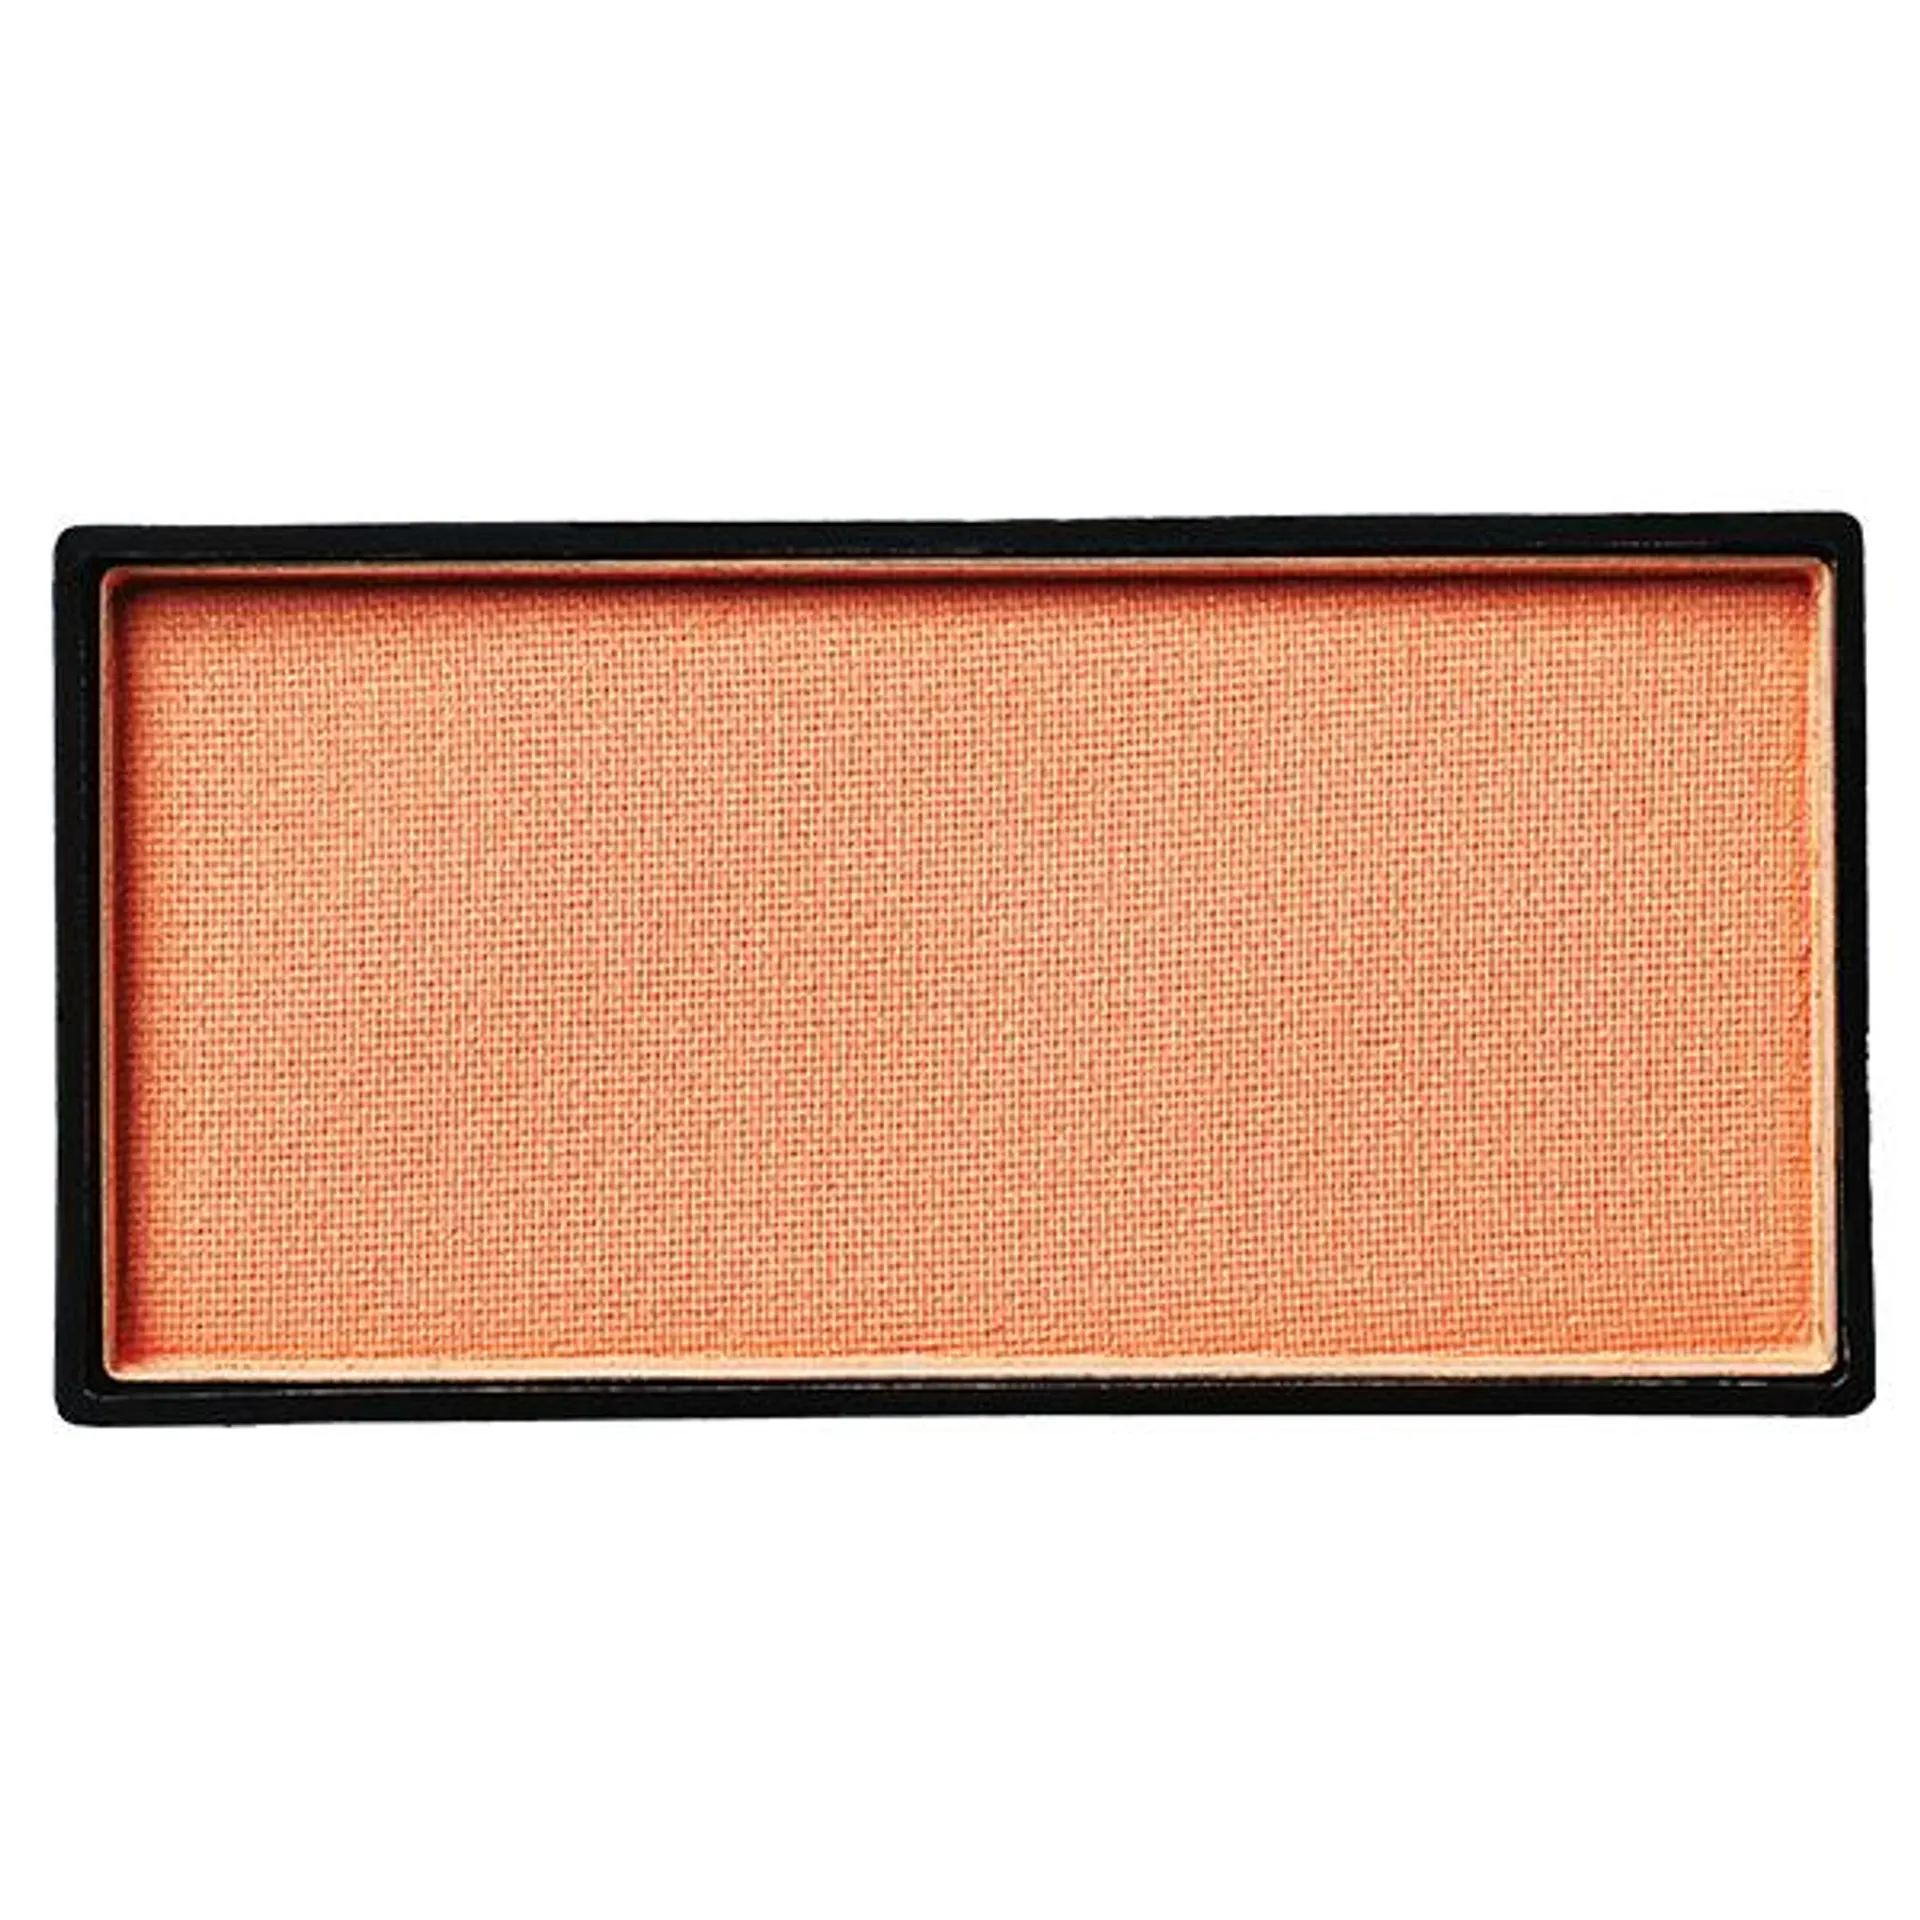 Blush Palette Maquillage Rechargeable